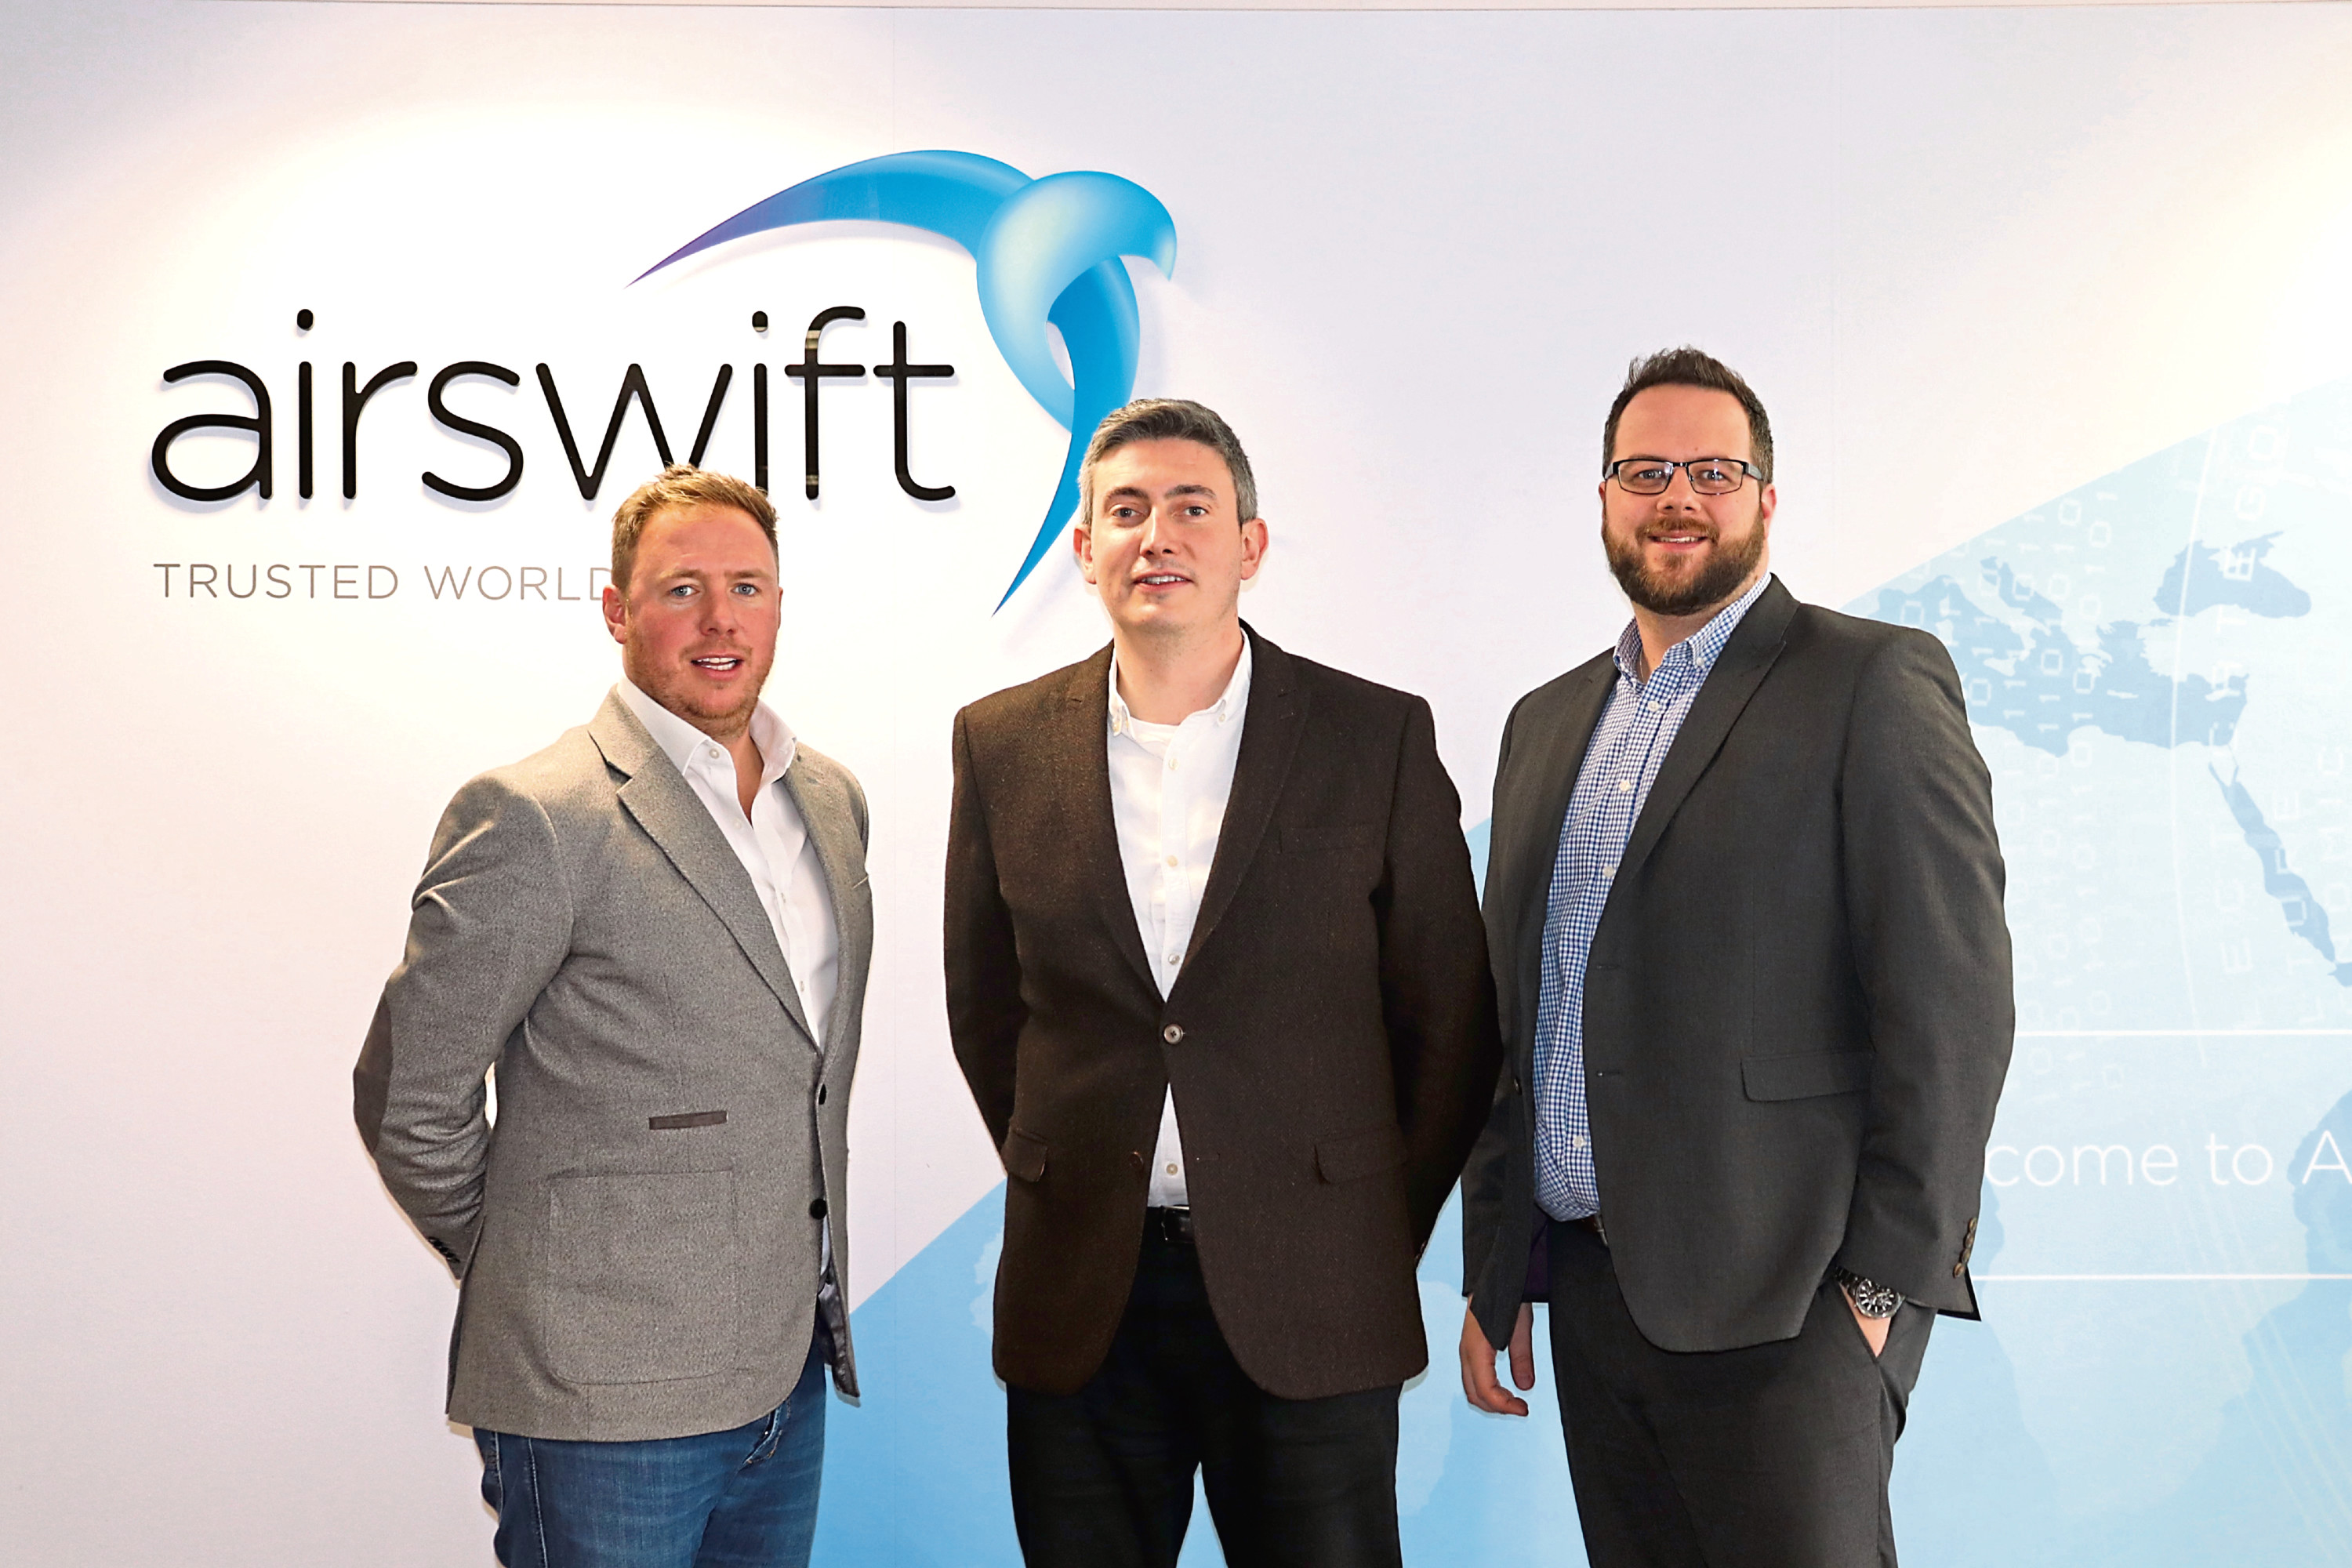 Airswift regional director Peter Denham, left, with Aberdeen client service managers David Gibb and Phil Hoyle.